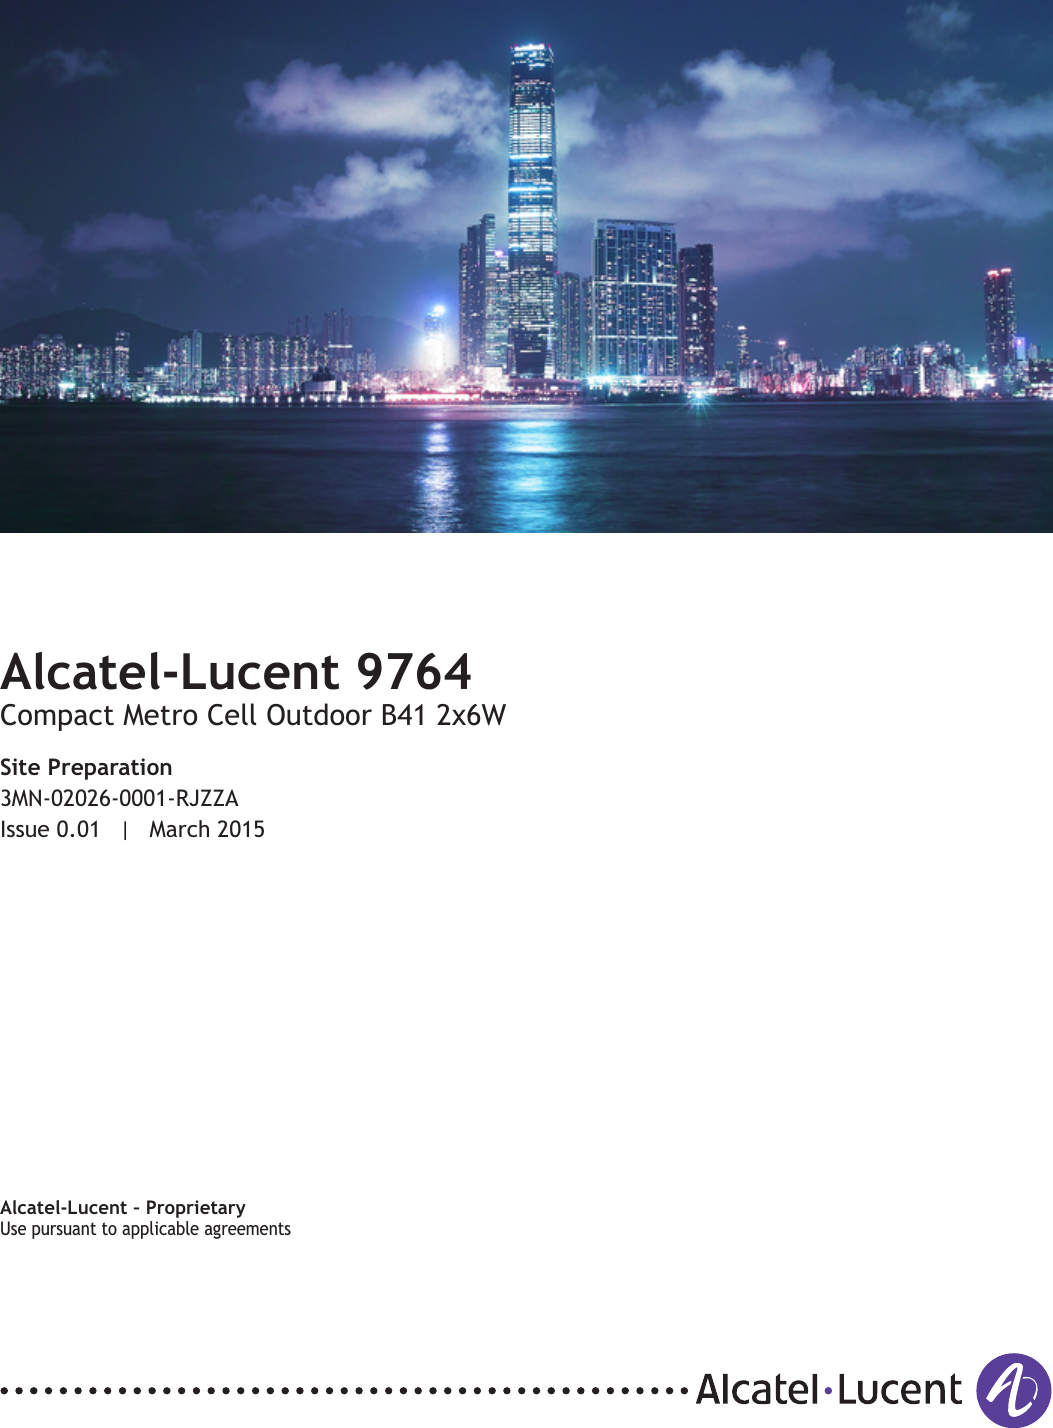 Title pageAlcatel-Lucent 9764Compact Metro Cell Outdoor B41 2x6WSite Preparation3MN-02026-0001-RJZZAIssue 0.01 | March 2015Alcatel-Lucent – ProprietaryUse pursuant to applicable agreementsUse pursuant to applicable agreementsDRAFTDRAFT